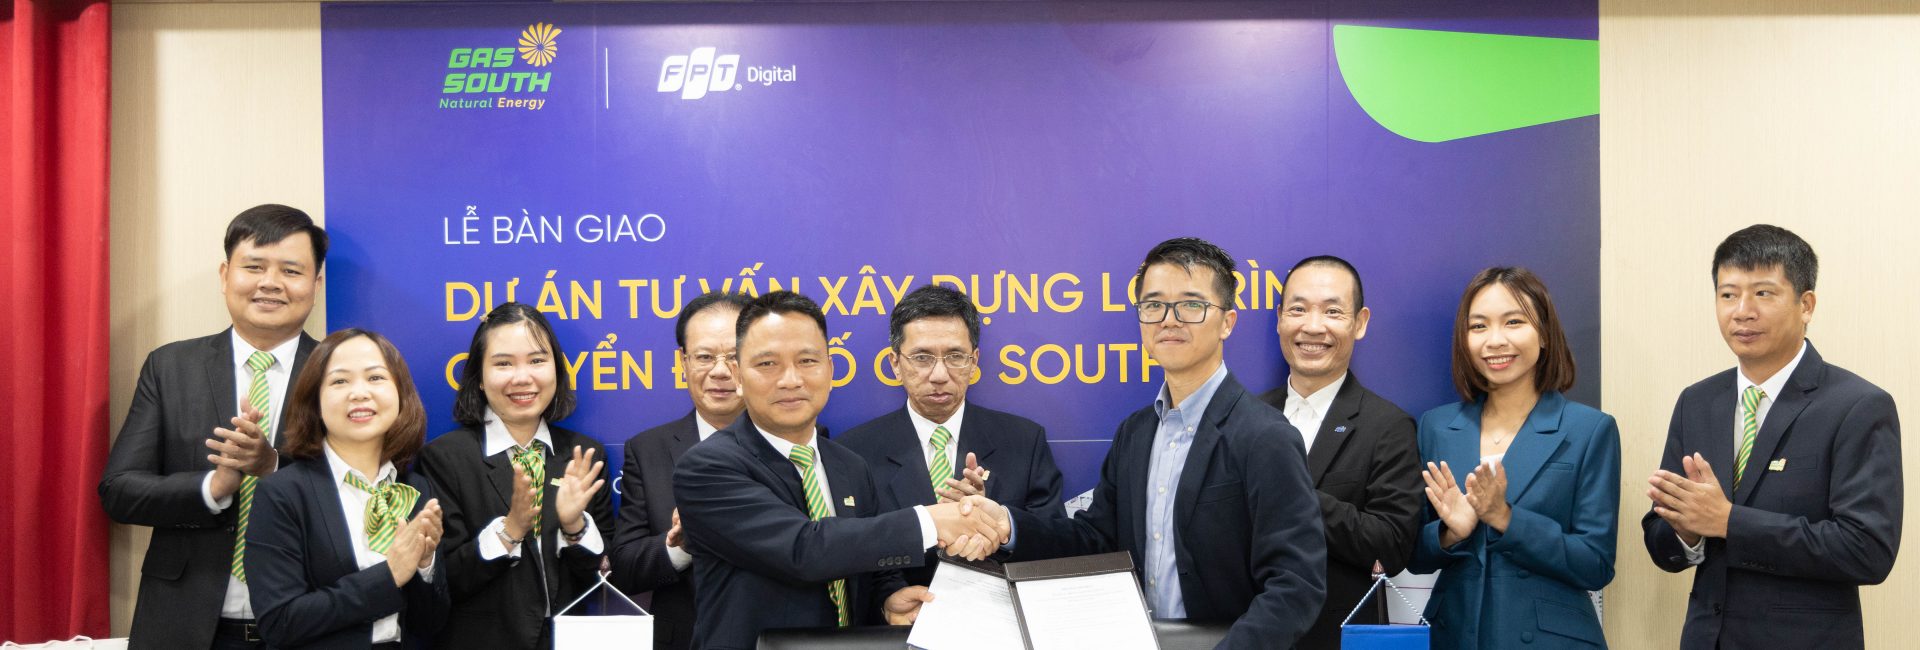 FPT Digital consults on Digital Transformation Roadmap for Gas South, towards sustainable development